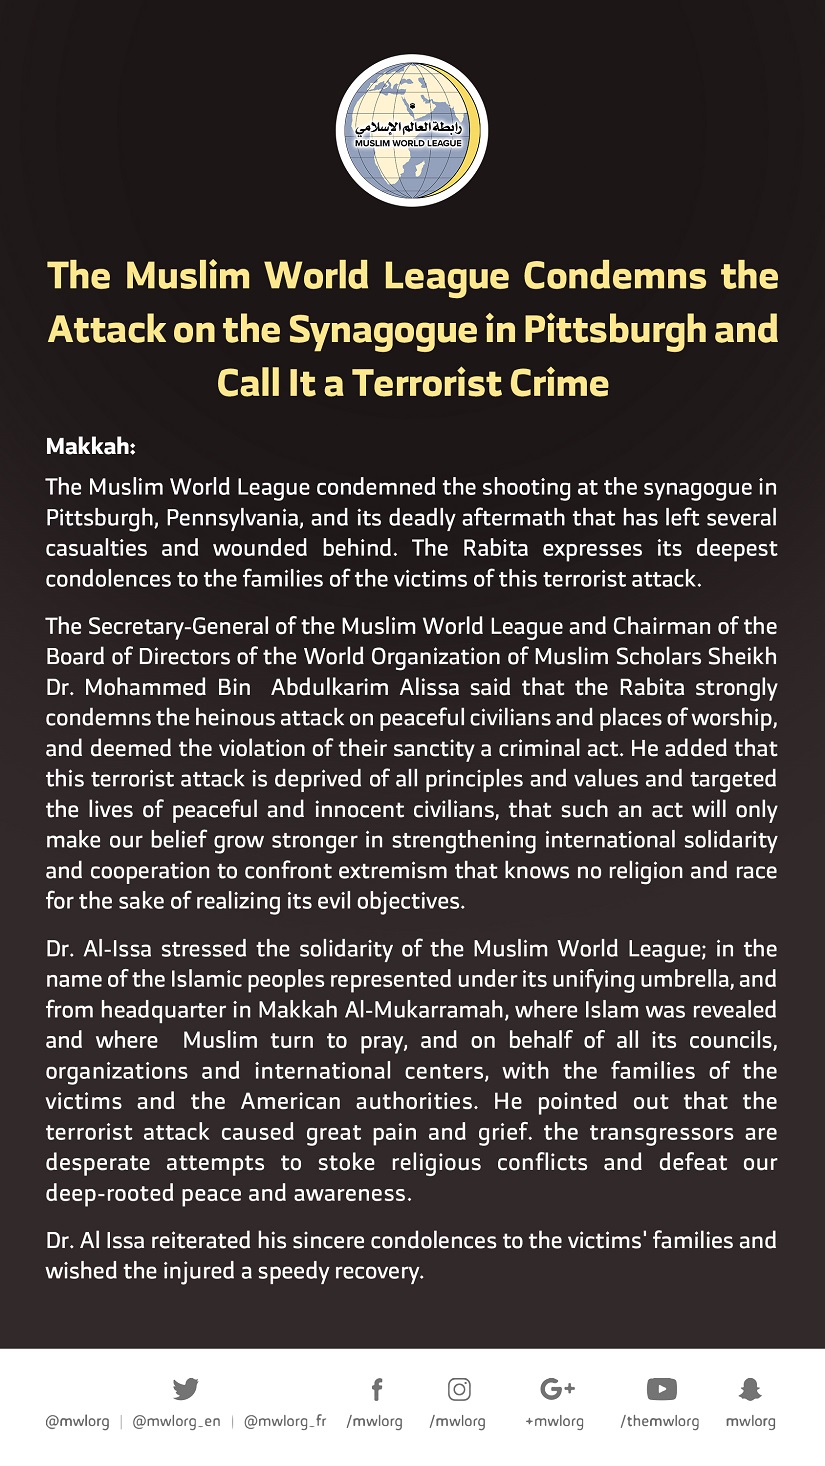 The #MuslimWorldLeague Condemns the Terrorist Attack Targetting a Synagogue in #Pittsburgh, USA: